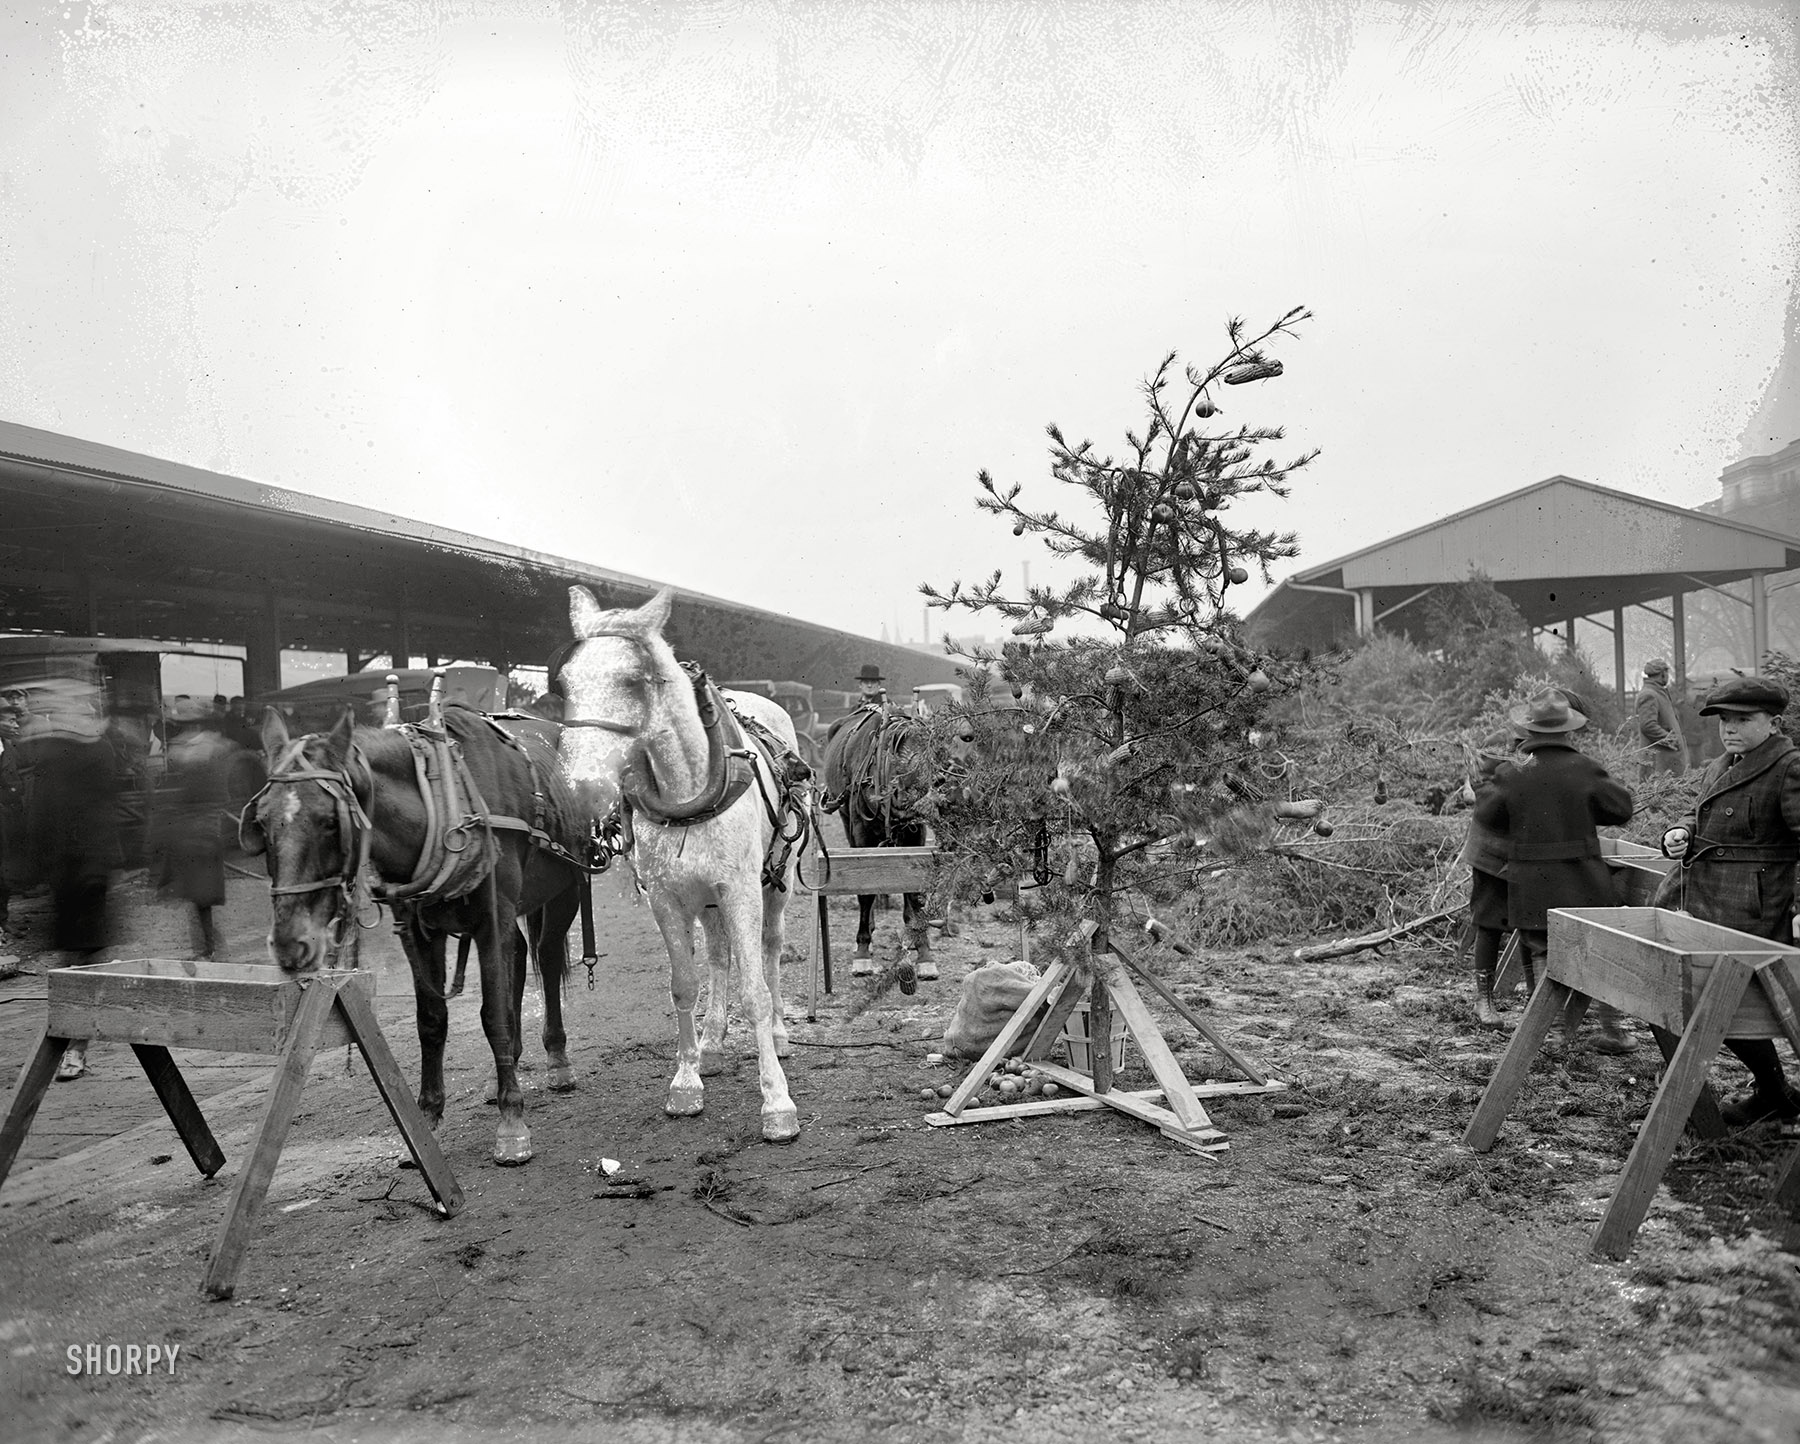 Washington, D.C. "Horse Christmas tree, 1919." Where's Charlie Brown when you need him? National Photo Company Collection glass negative. View full size.